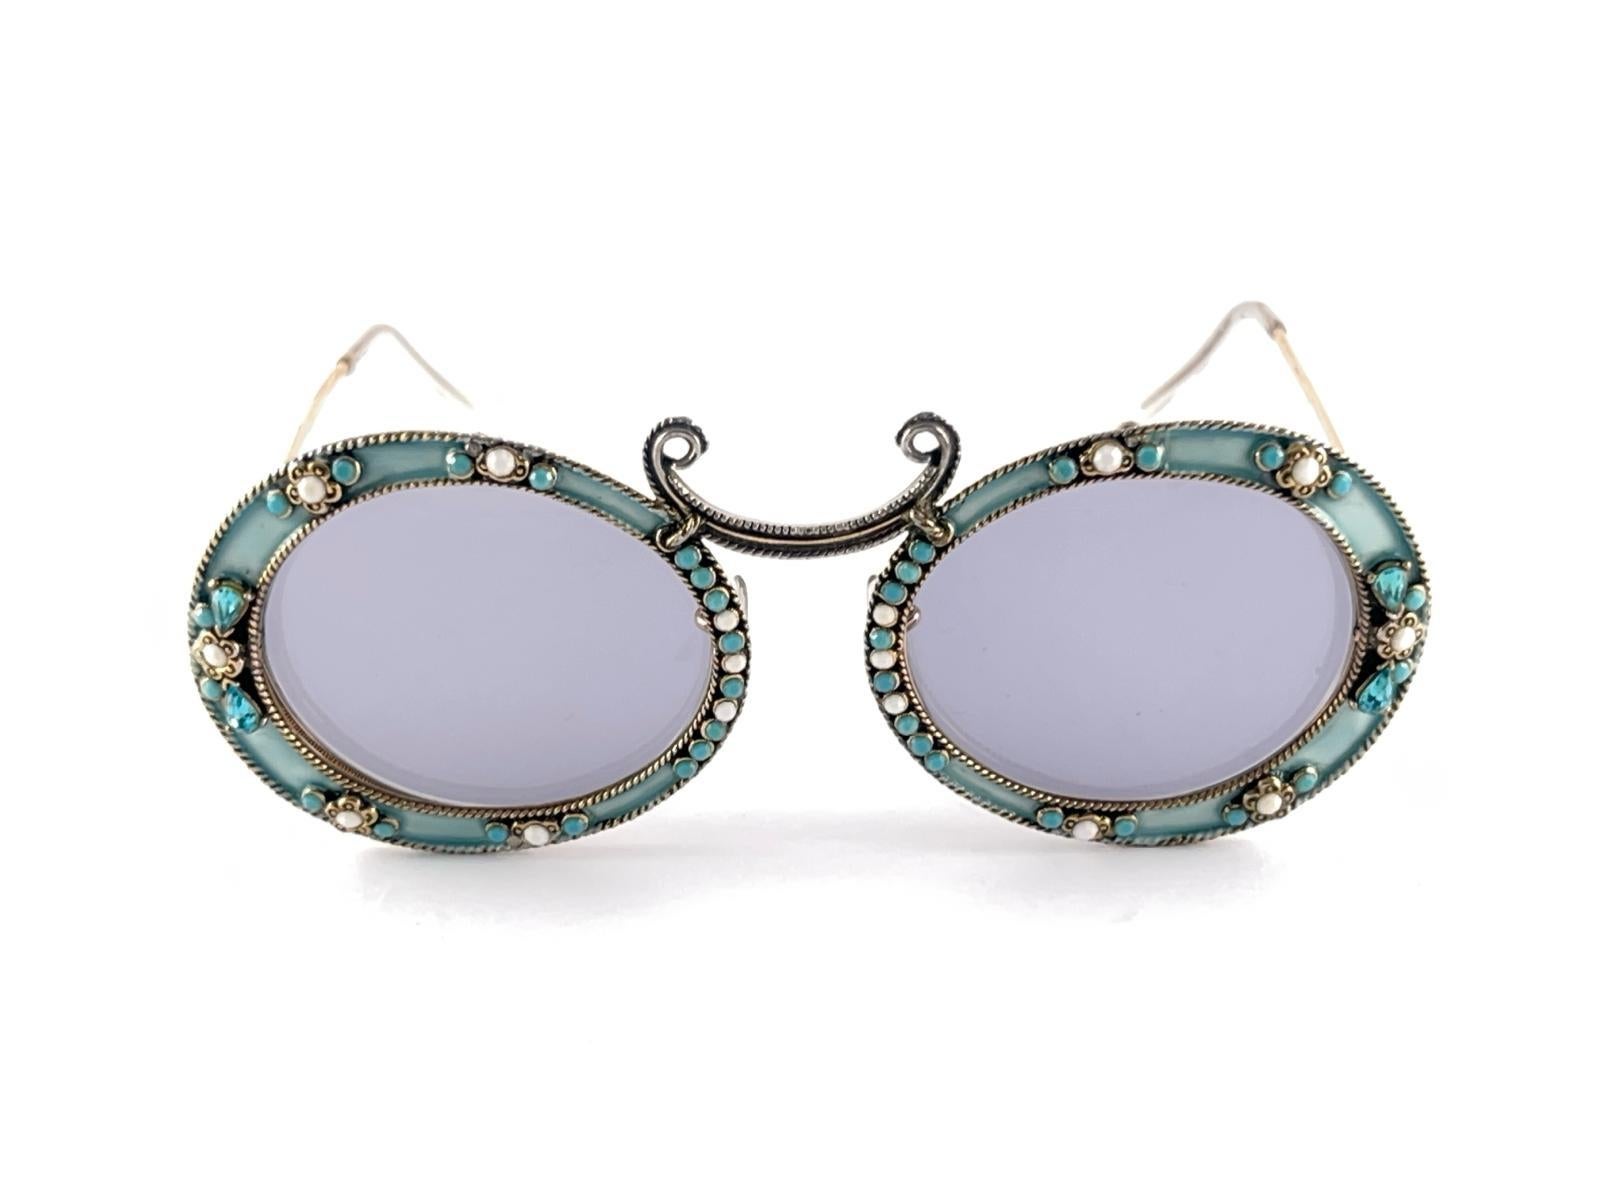 Ultra Rare 1960 Christian Dior Enamel Jewelled by Tura Collector Item Sunglasses In Excellent Condition For Sale In Baleares, Baleares